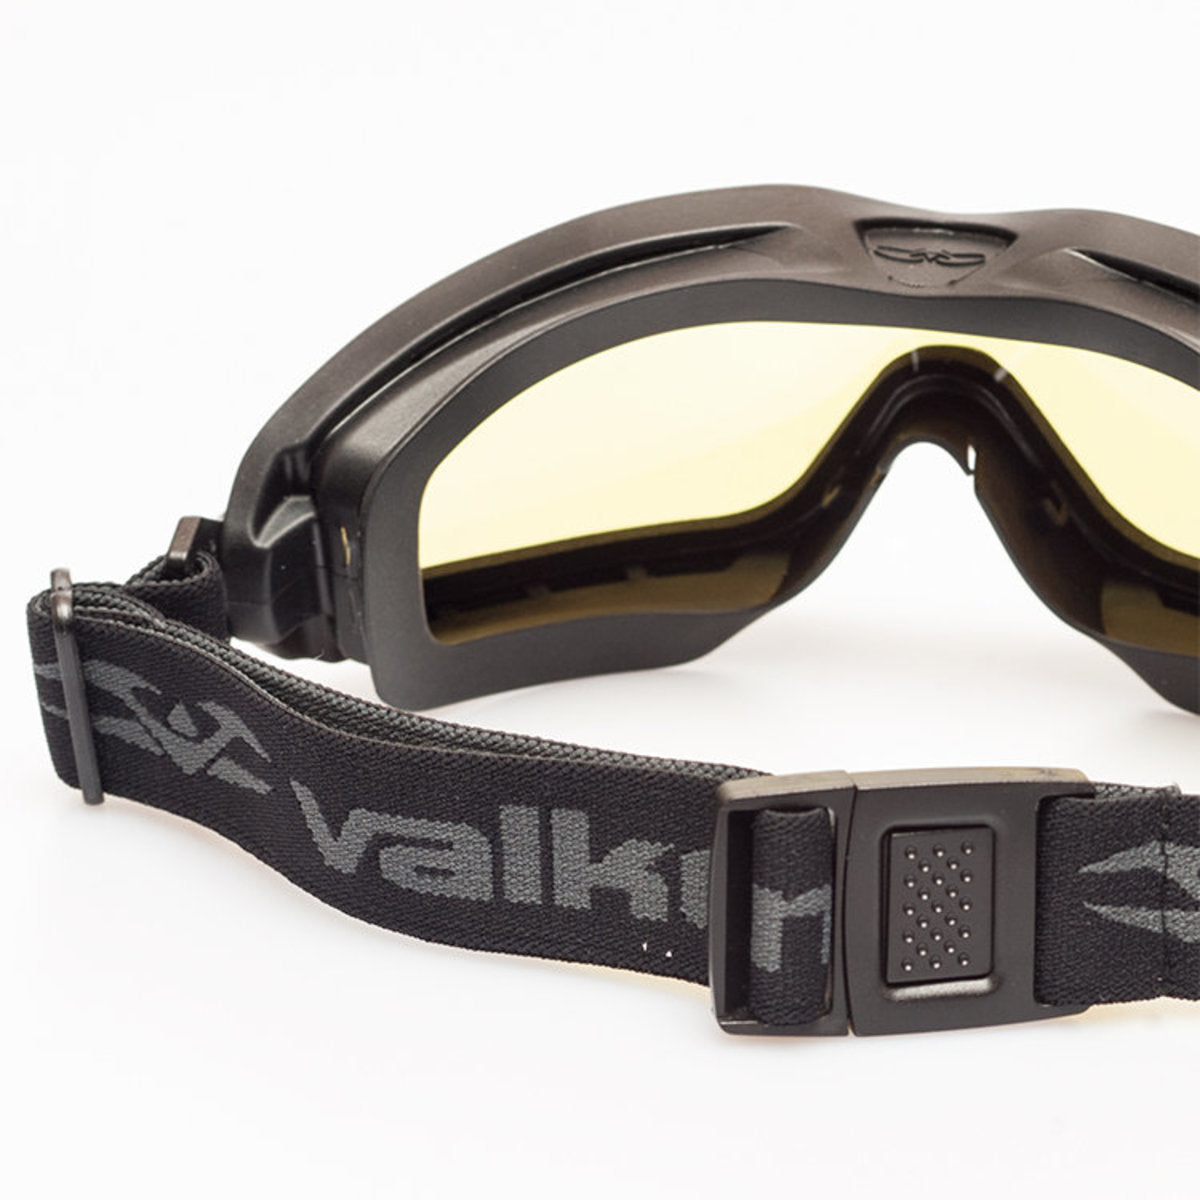 Valken Tactical Sierra Airsoft Goggle Black with Smoke Lens New Dual Pane  Lens